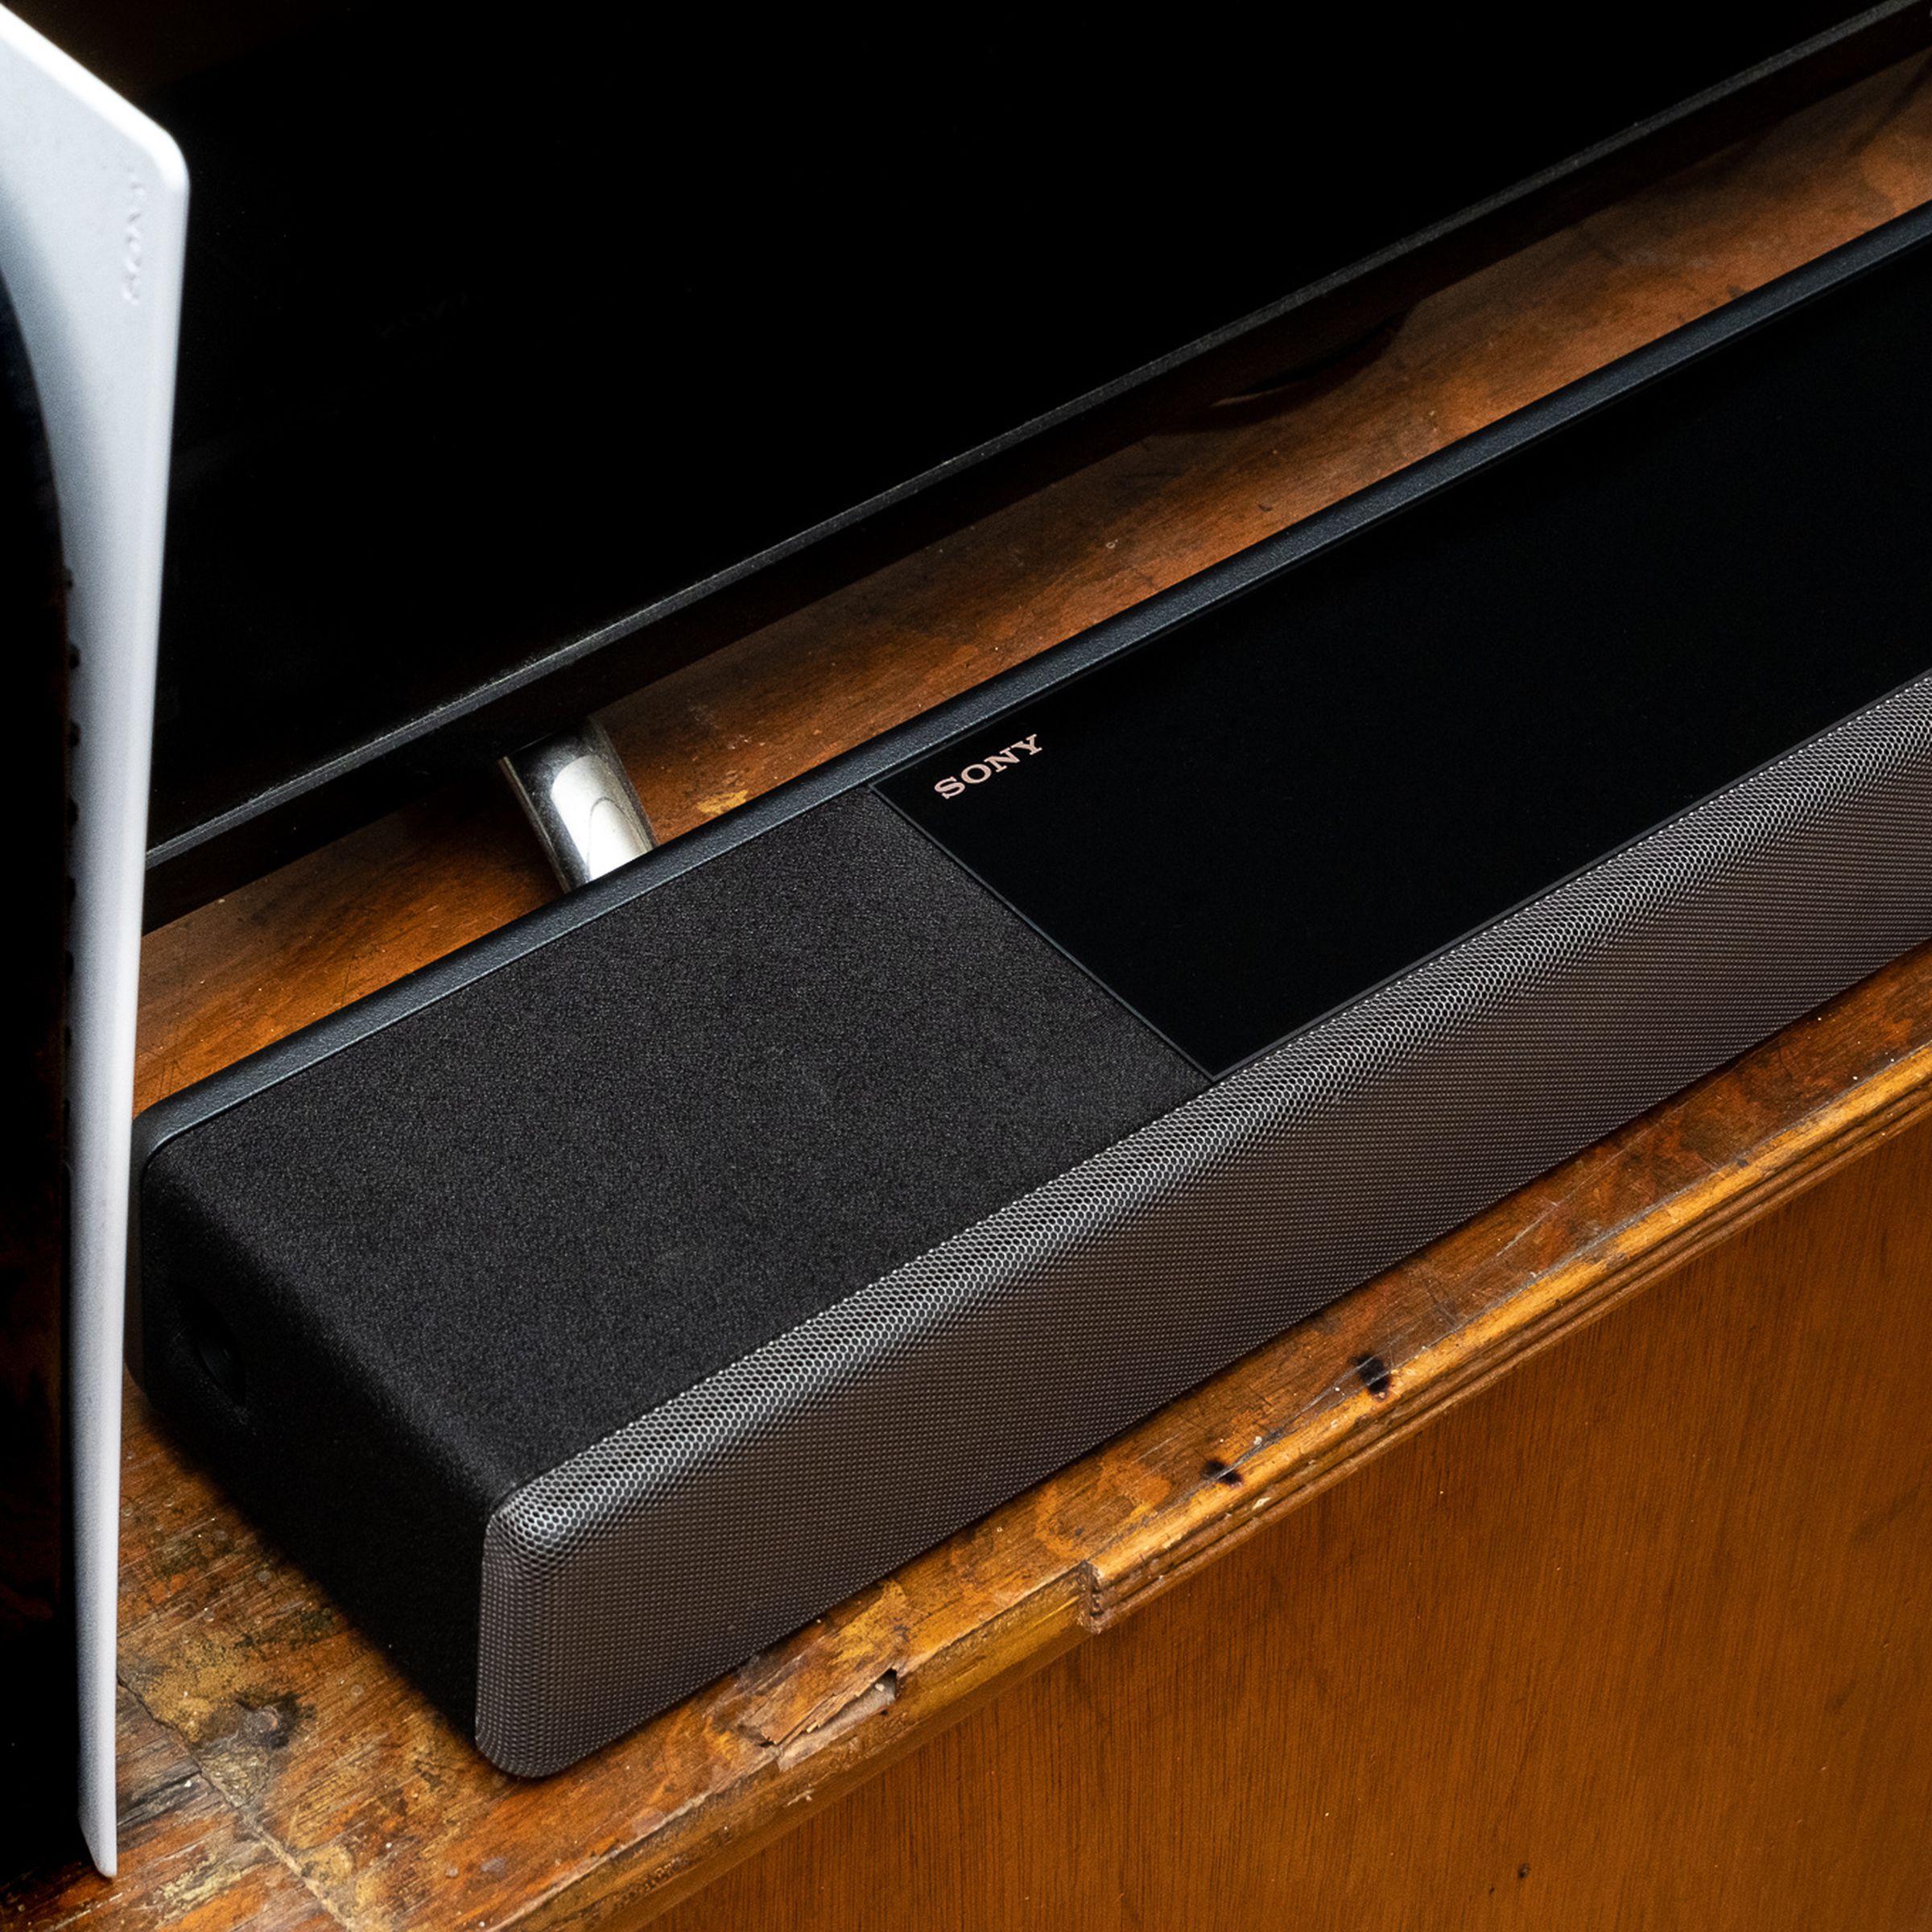 This $40,000 speaker is ridiculous - The Verge